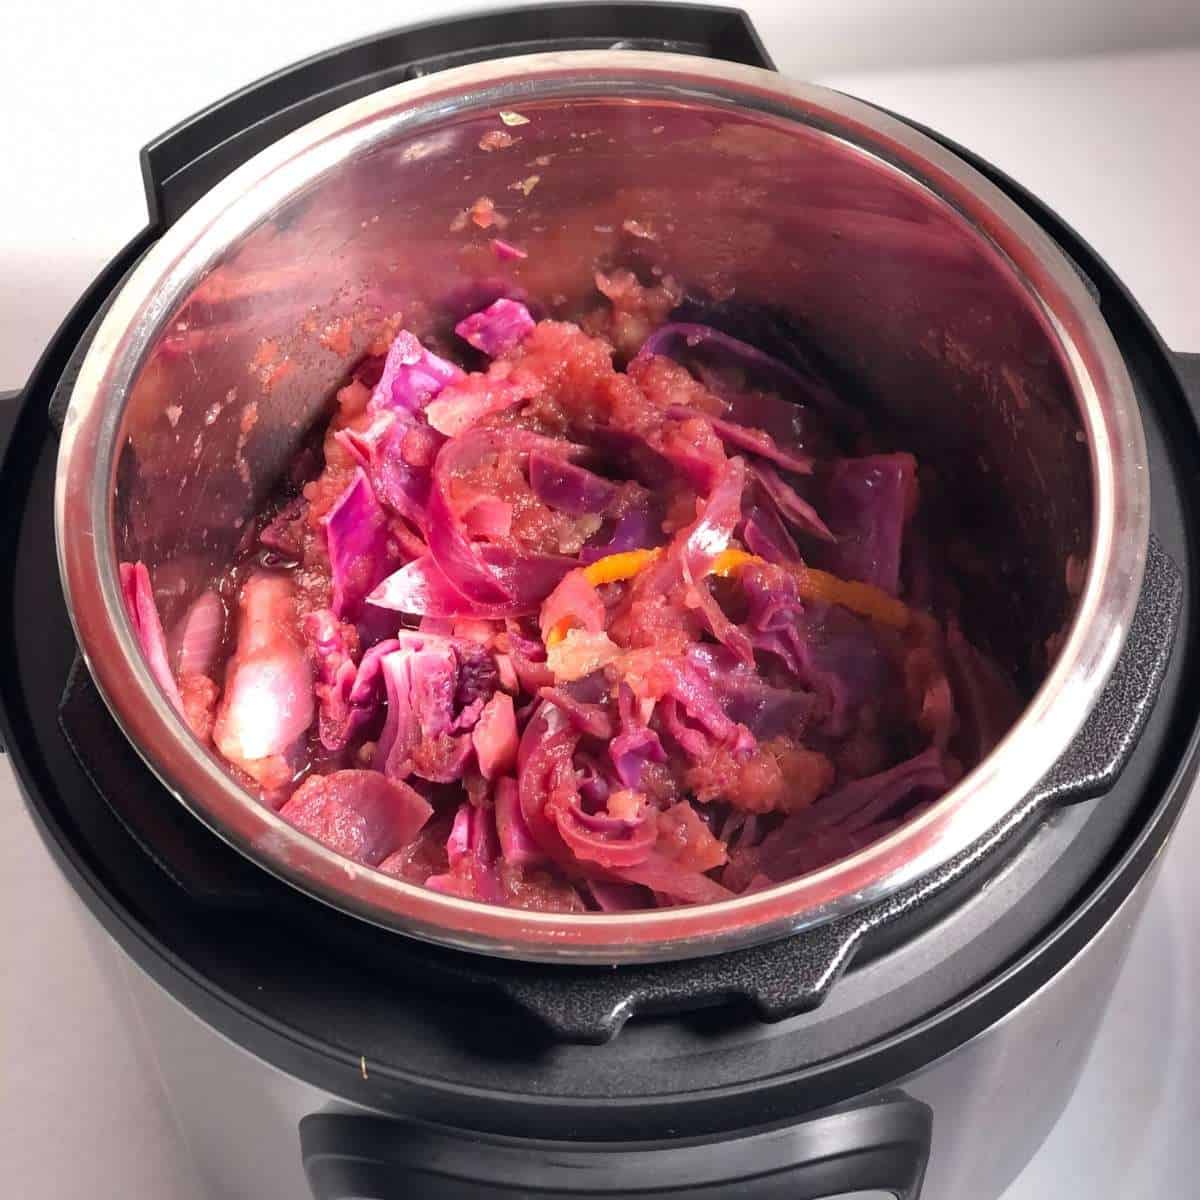 https://www.feistytapas.com/wp-content/uploads/2020/12/How-to-pressure-cook-Red-Cabbage-with-Instant-Pot-Instructions.jpg